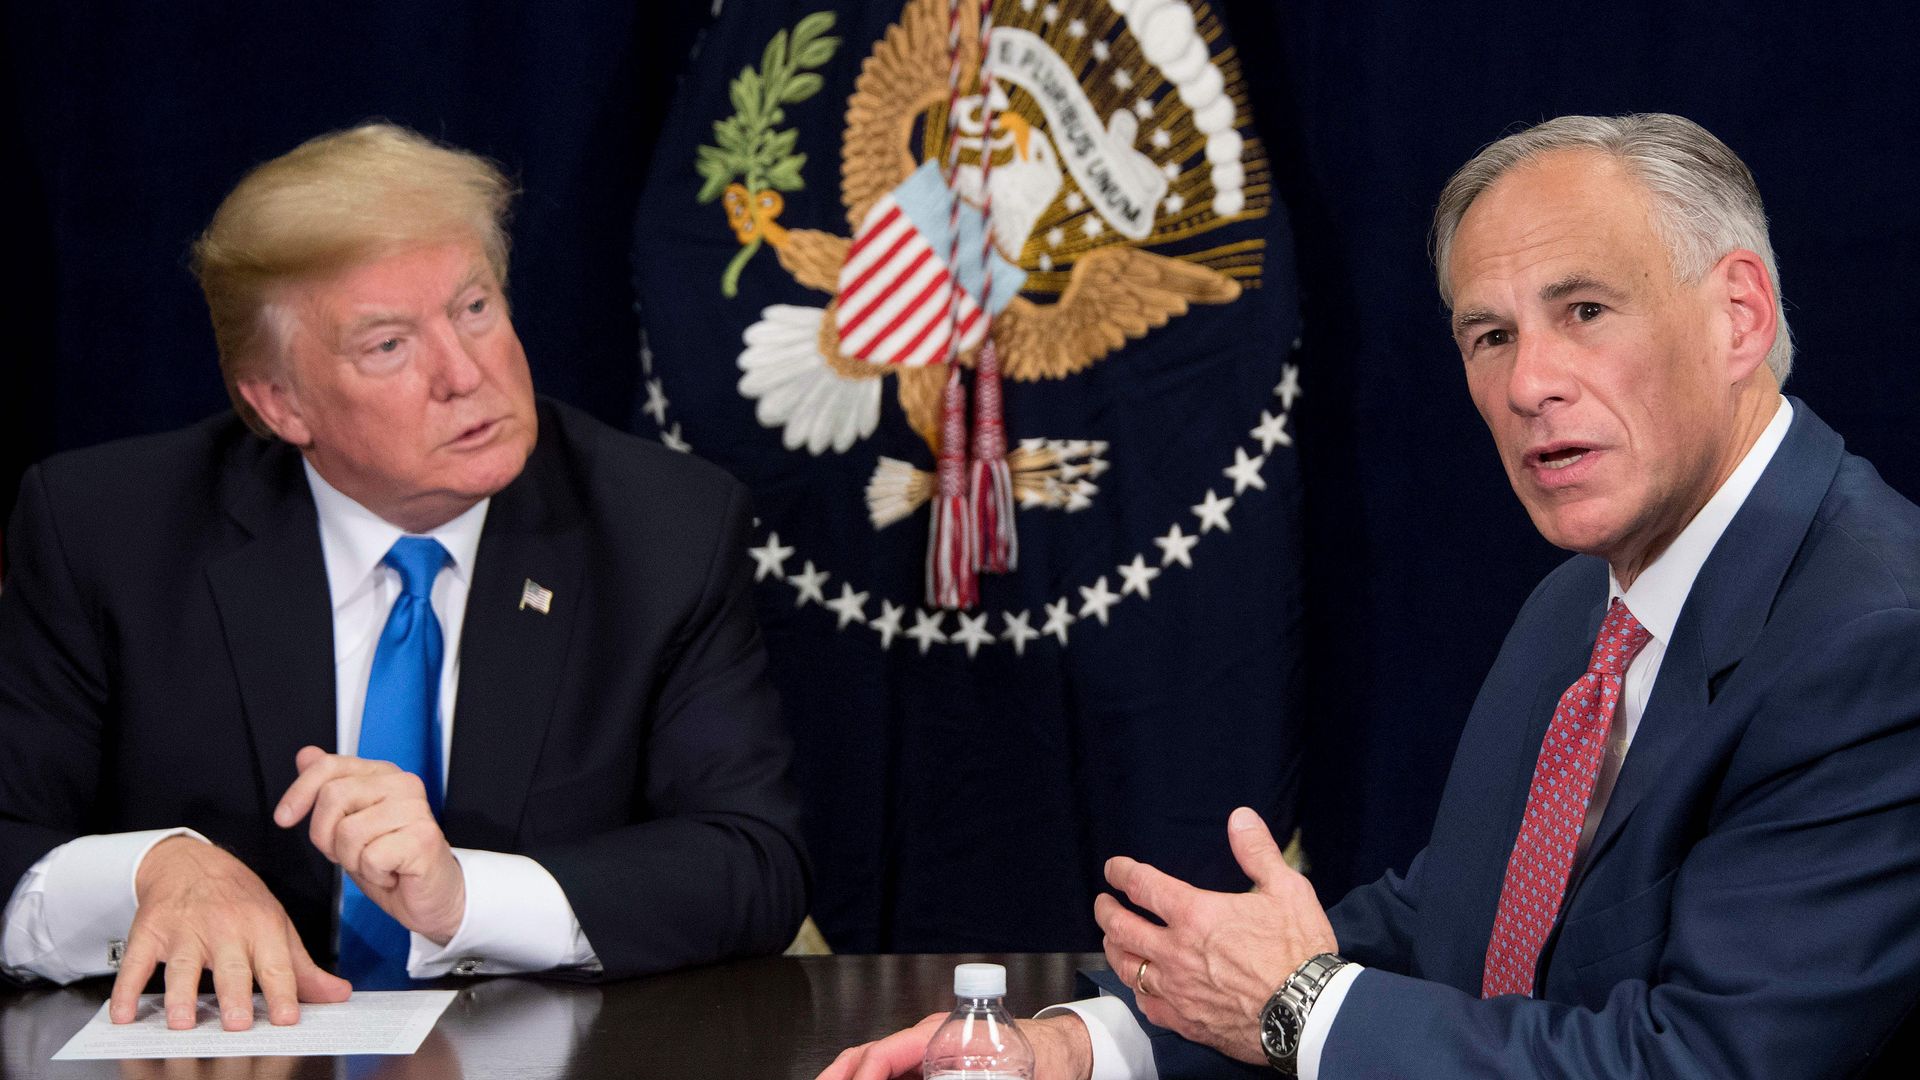 Texas Governor Greg Abbott sitting down and talking to President Donald Trump